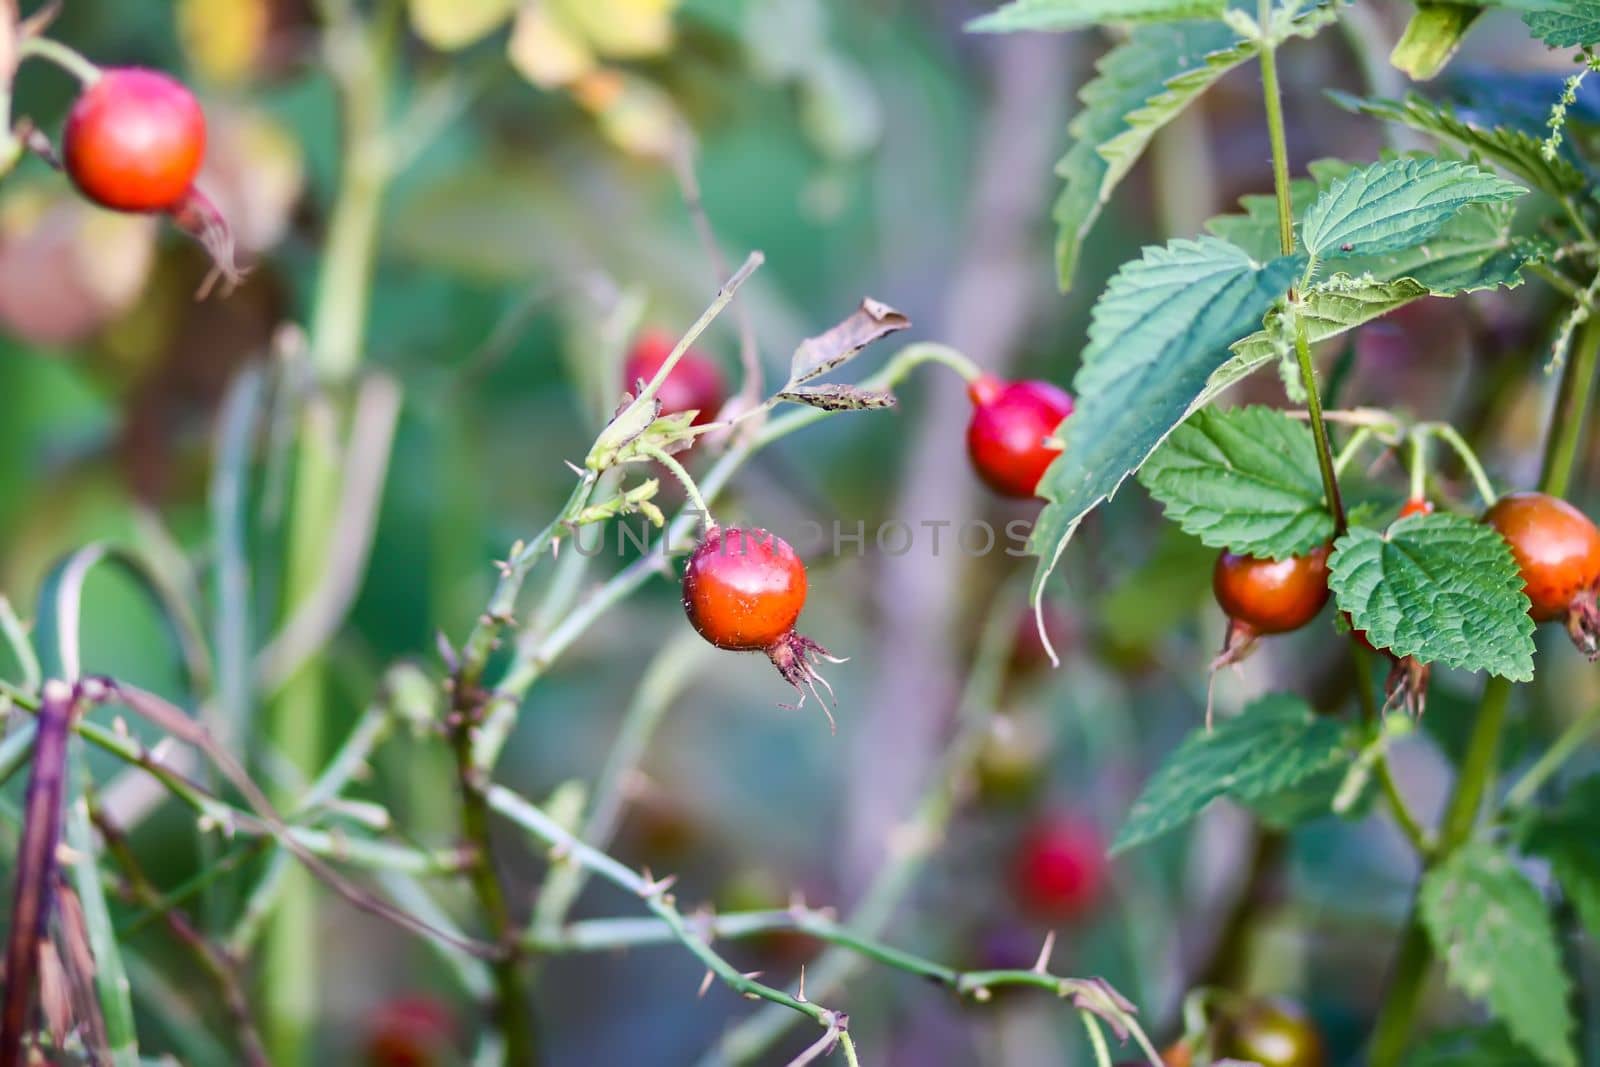 Rosehip berries on the twigs. Medical plant by nightlyviolet